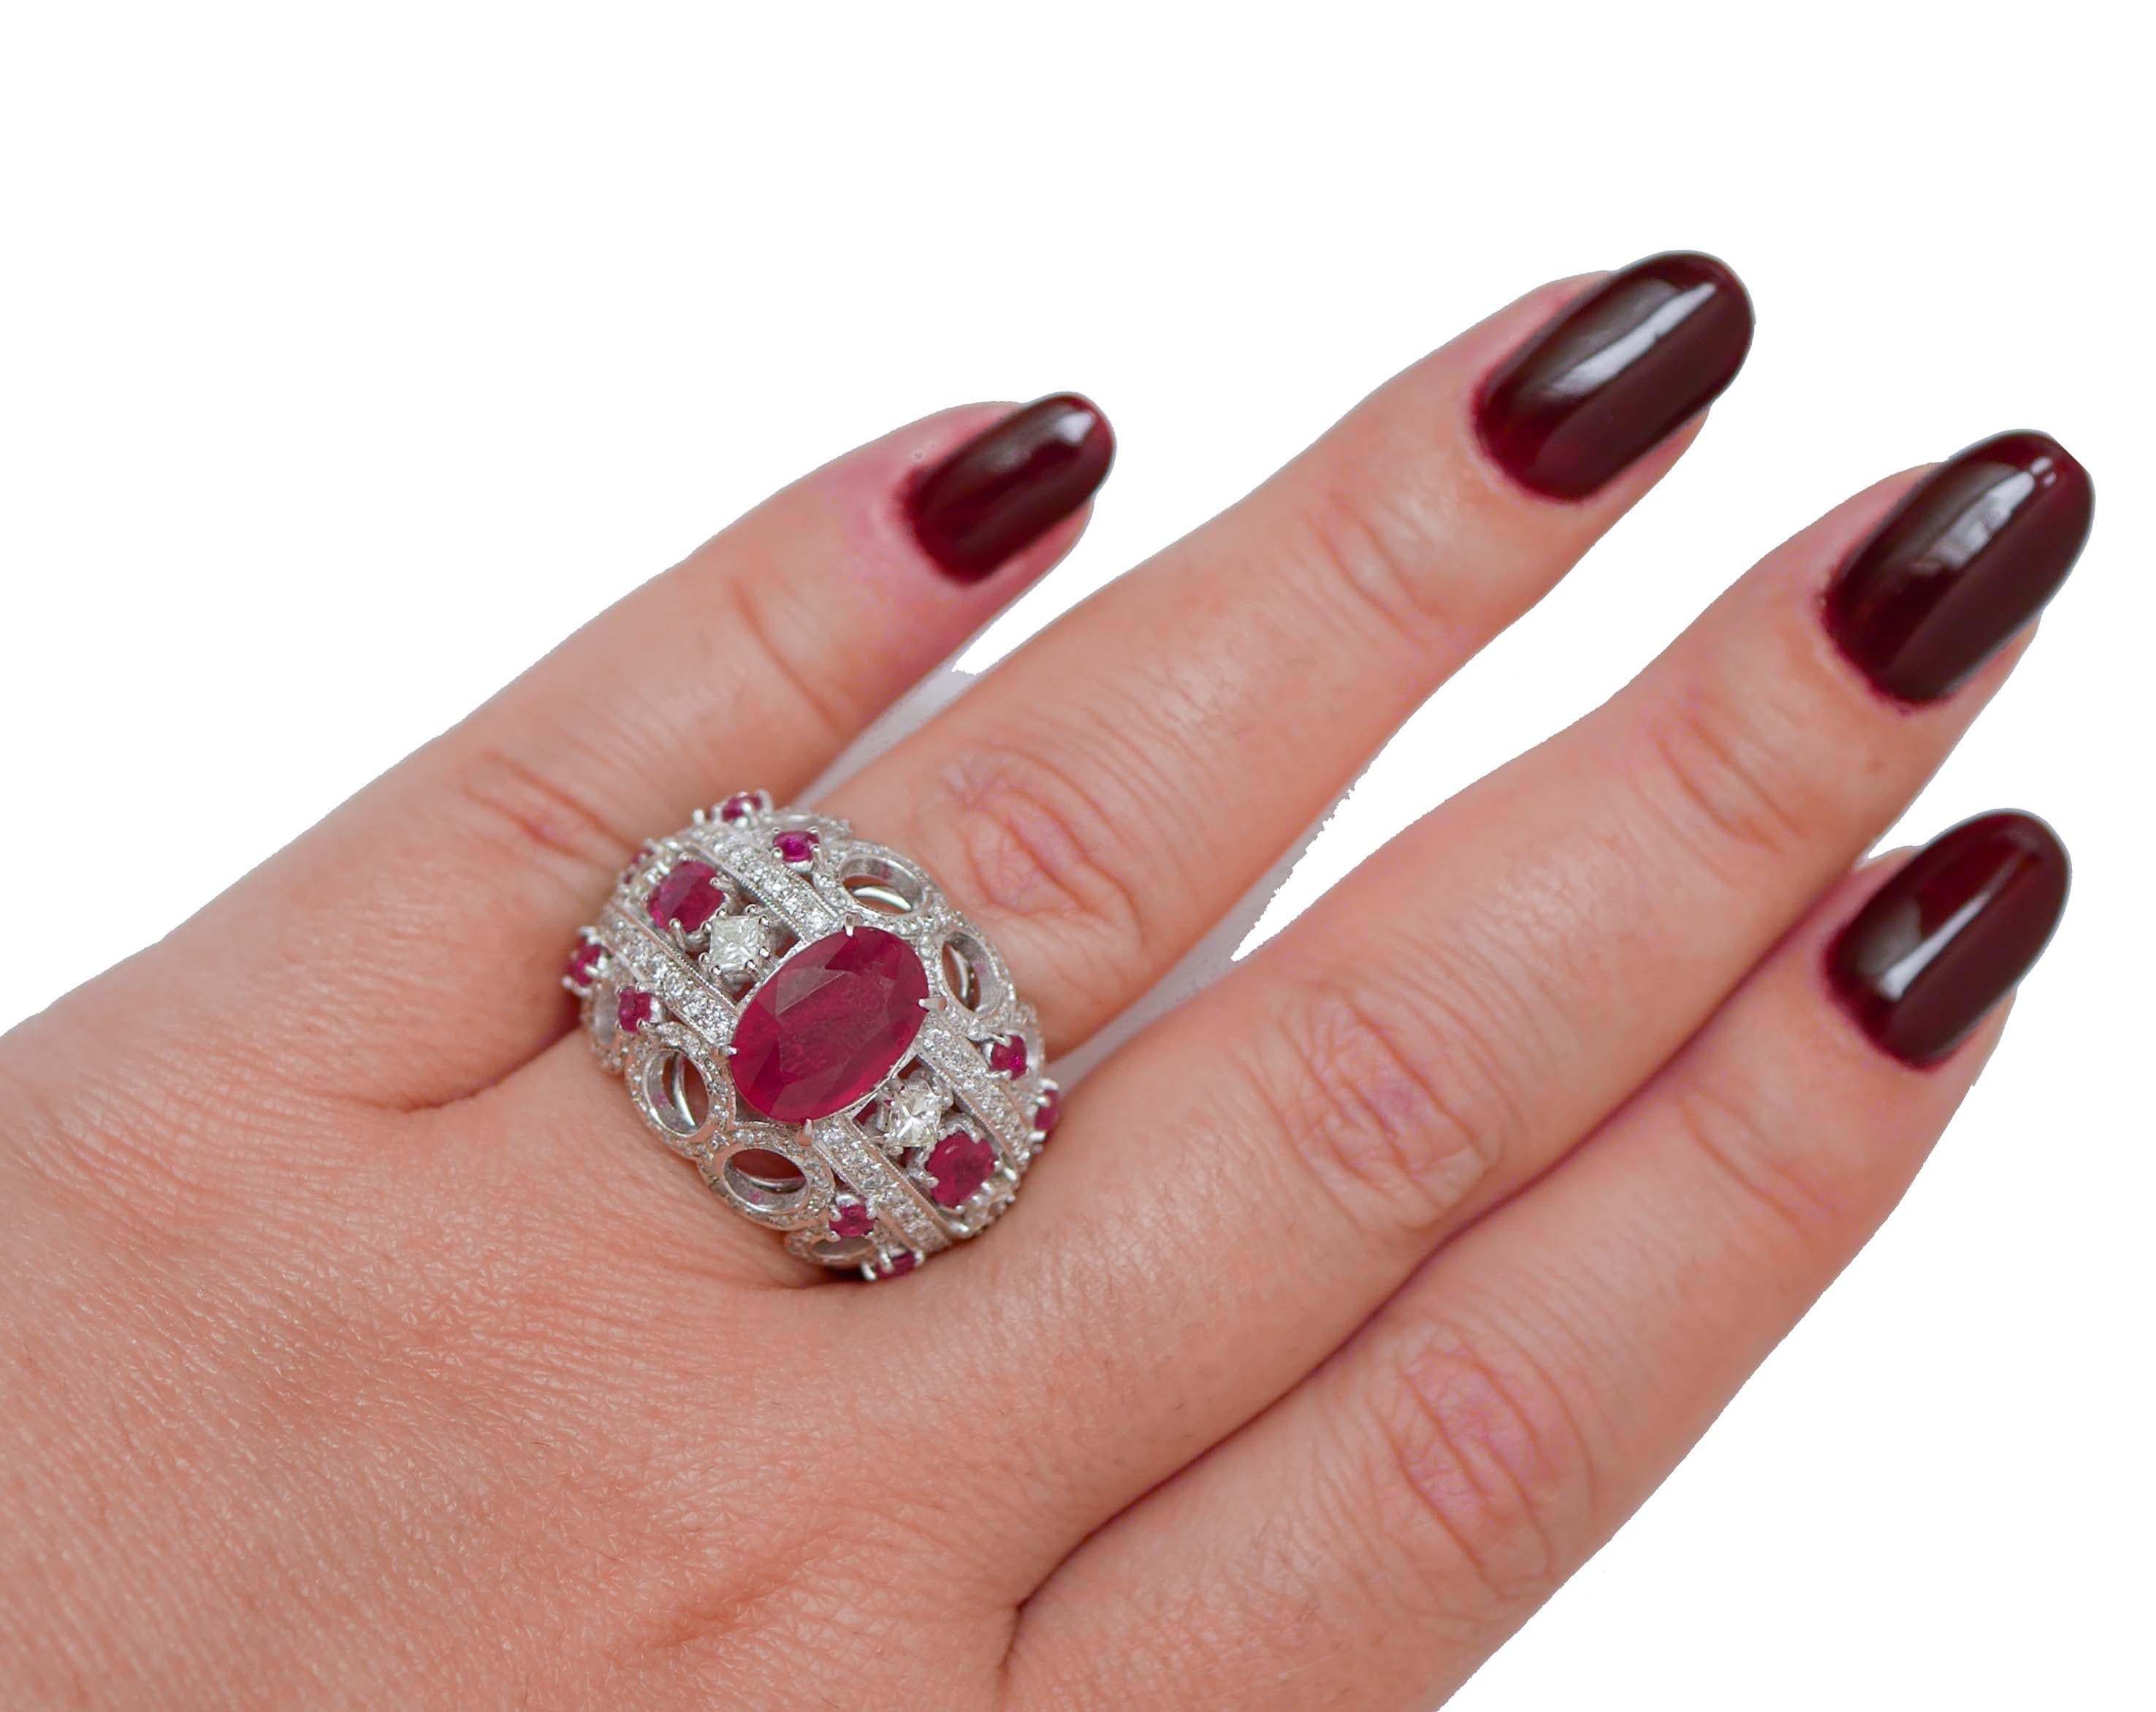 Rubies, Diamonds, 14 Karat White Gold Band Ring. In Good Condition For Sale In Marcianise, Marcianise (CE)